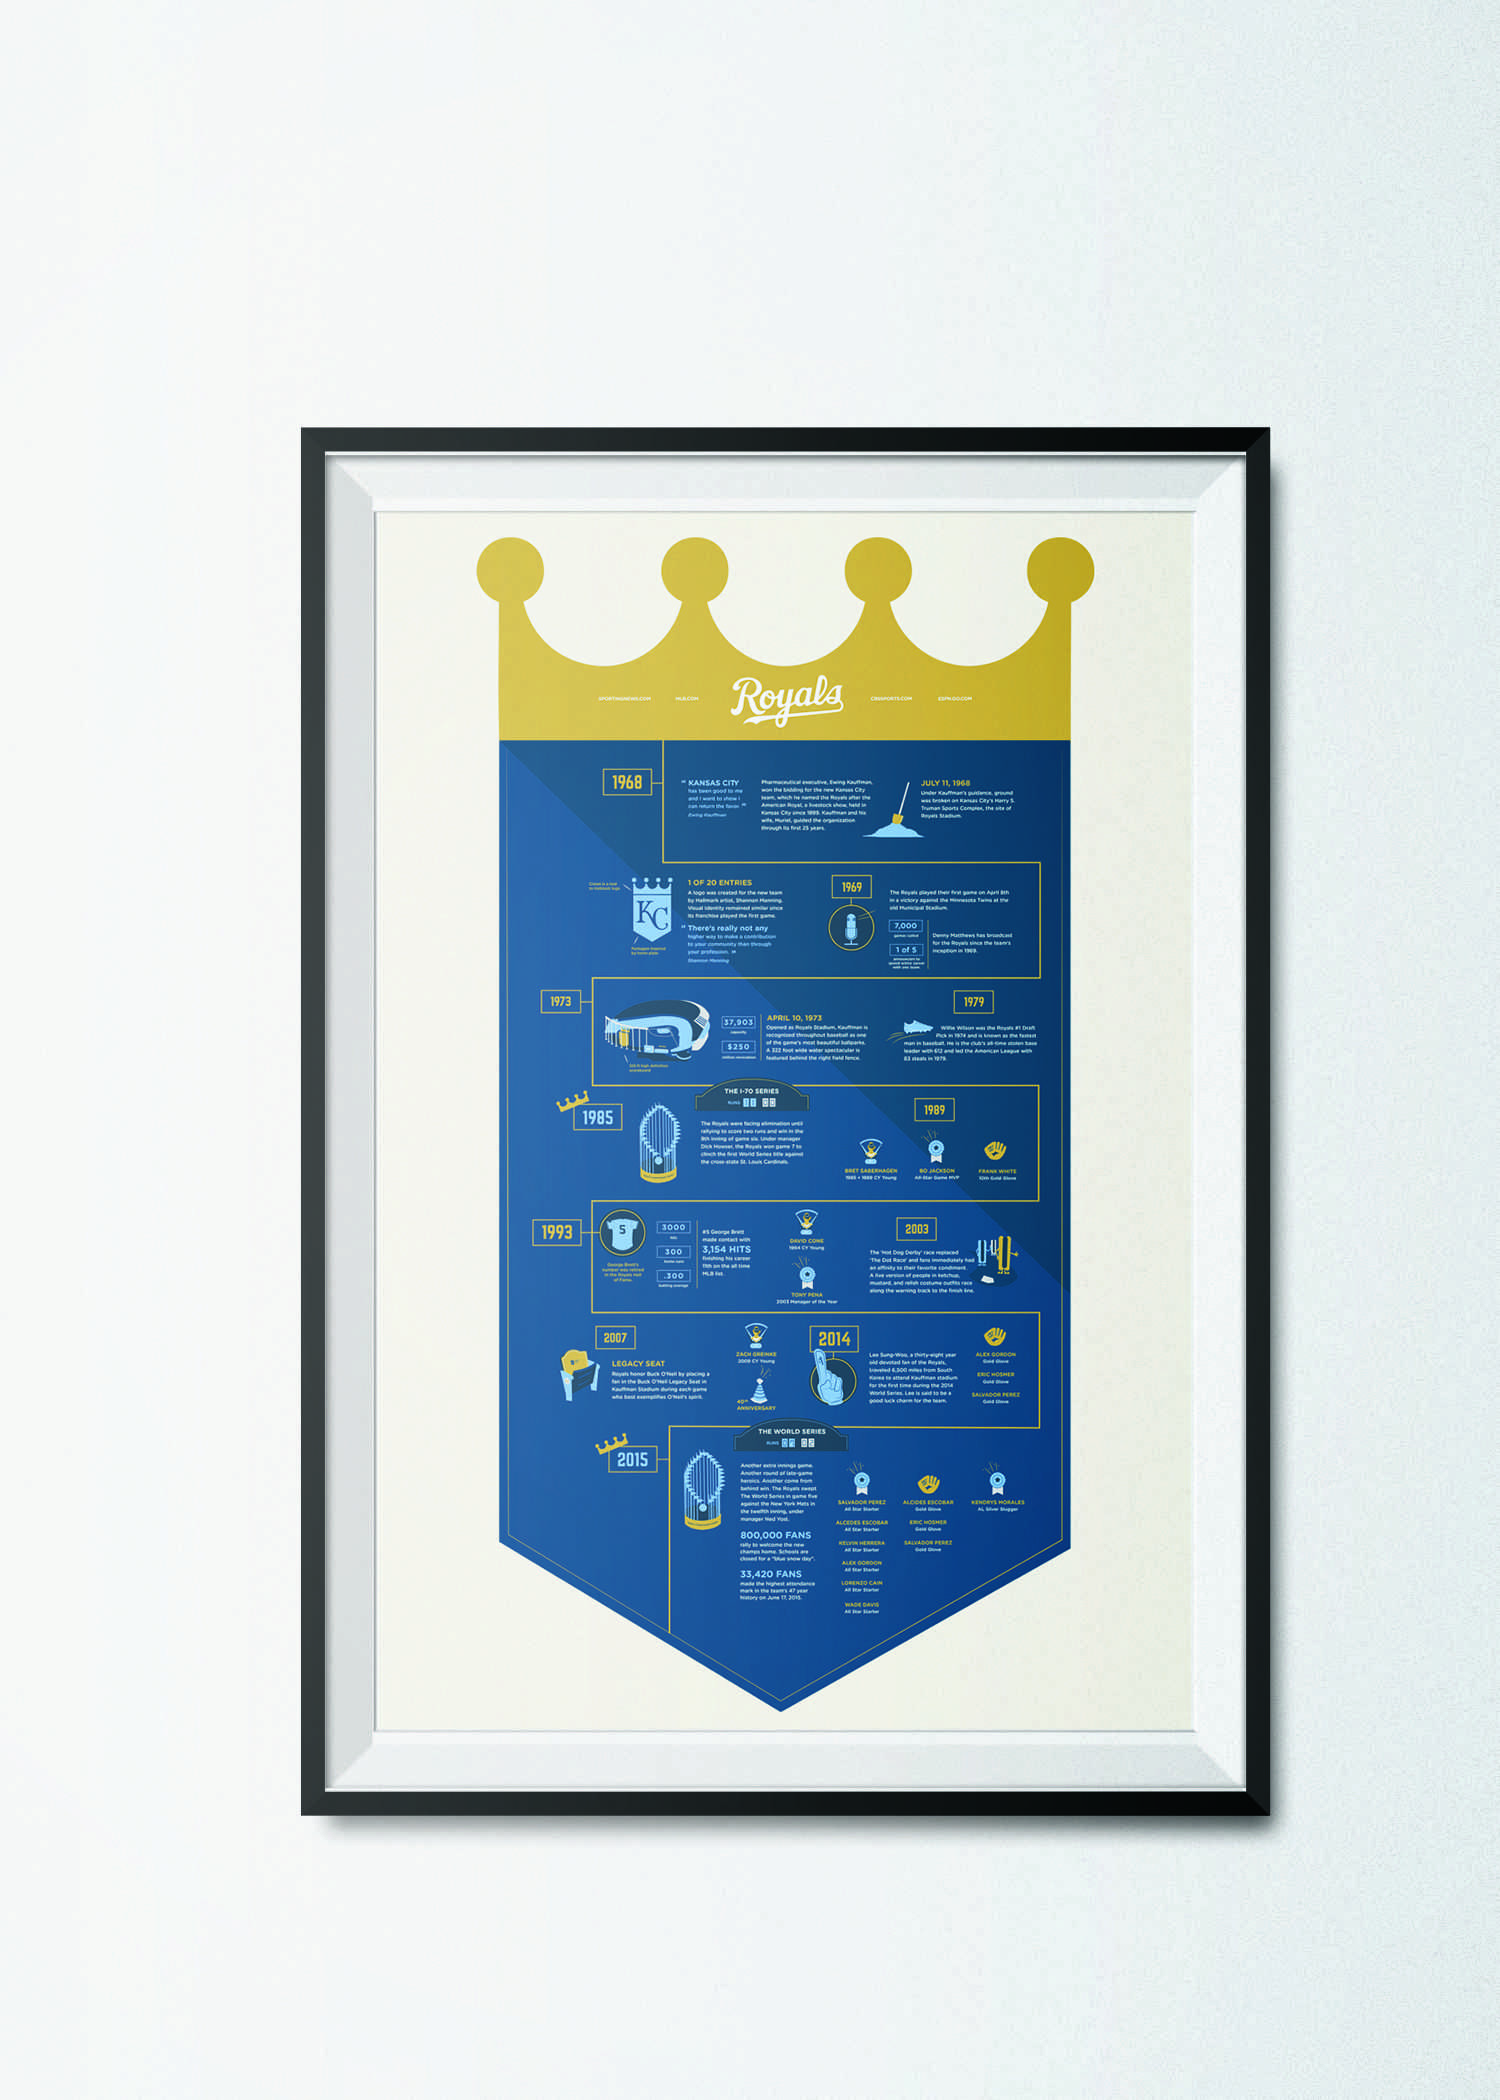 Fales said one of her favorite pieces was a visual timeline of the Kansas City Royals. (Photo Courtesy of Kylie Fales) 